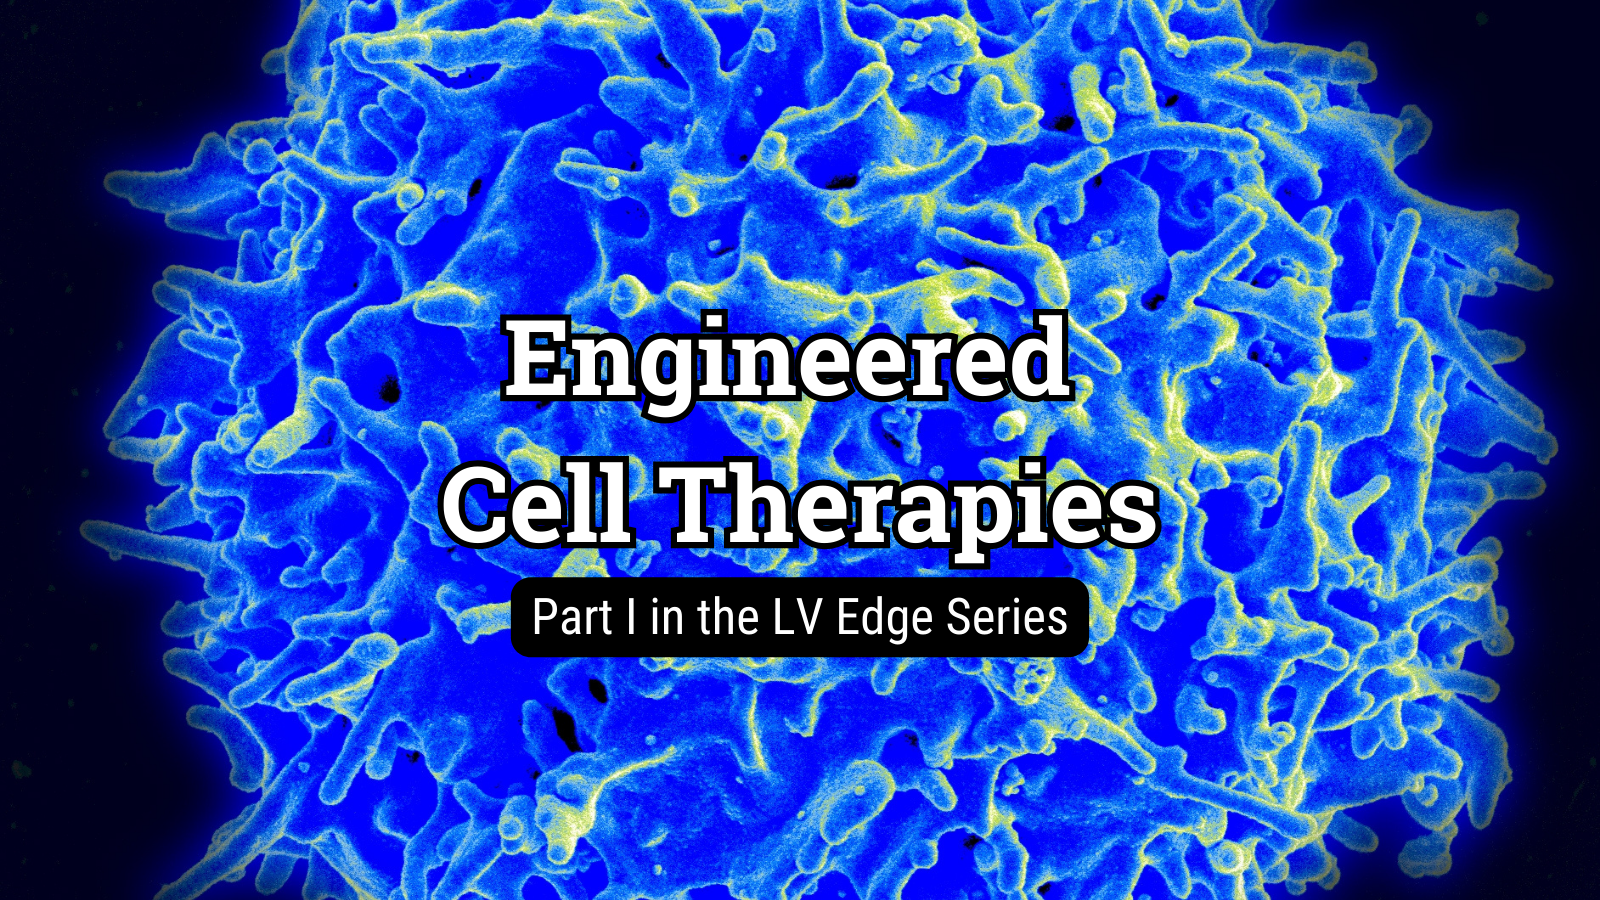 Engineered cell therapies